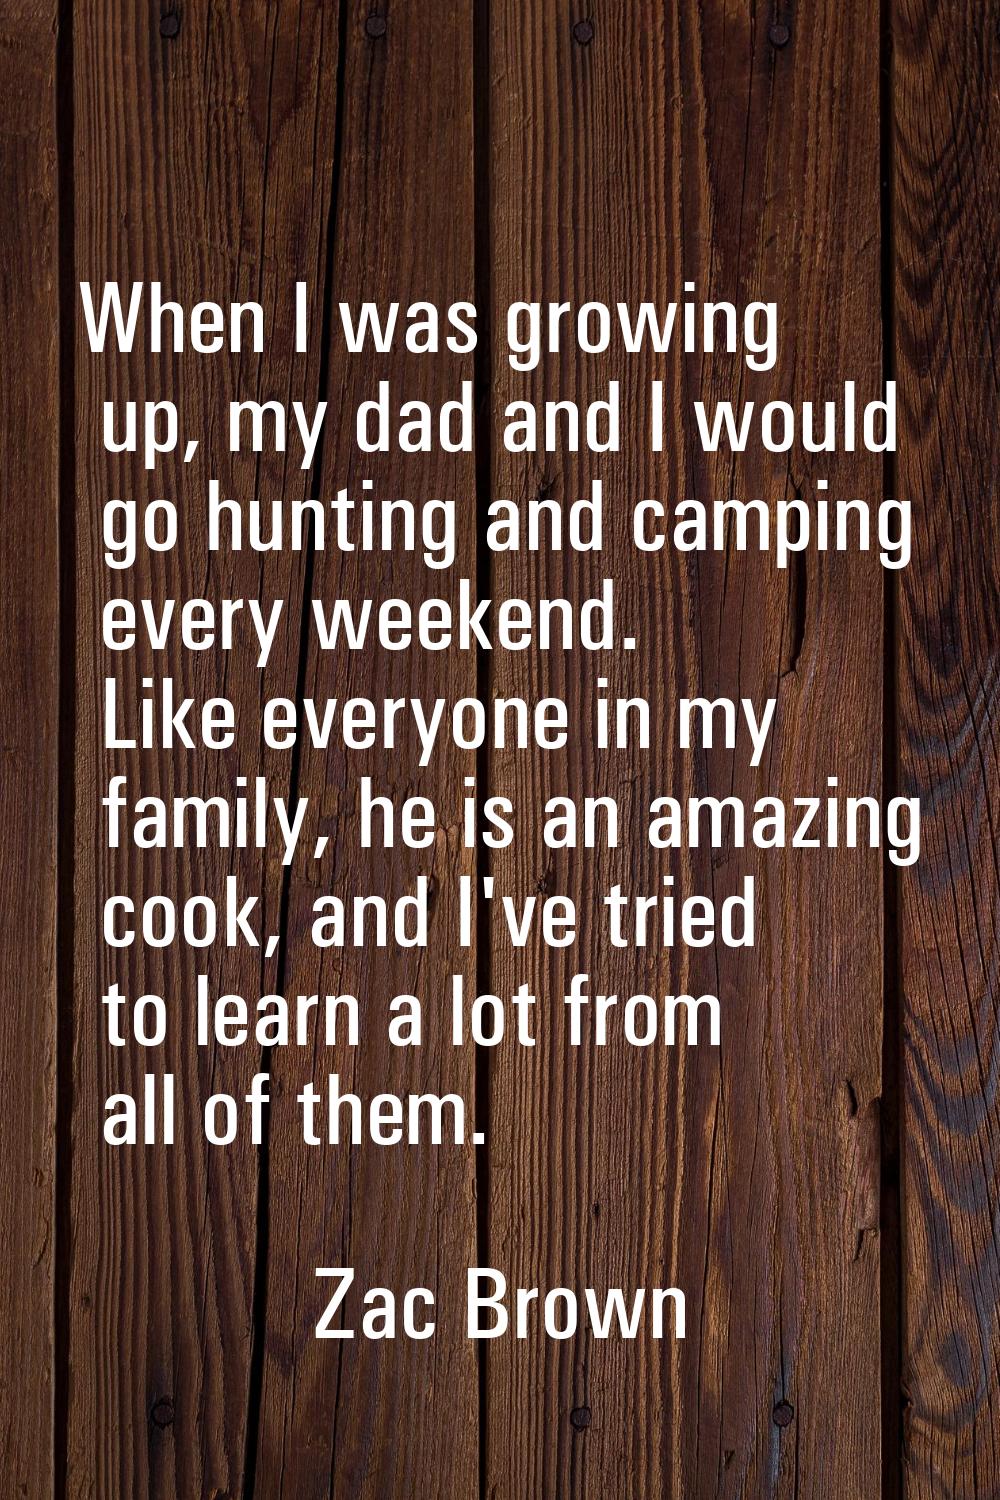 When I was growing up, my dad and I would go hunting and camping every weekend. Like everyone in my